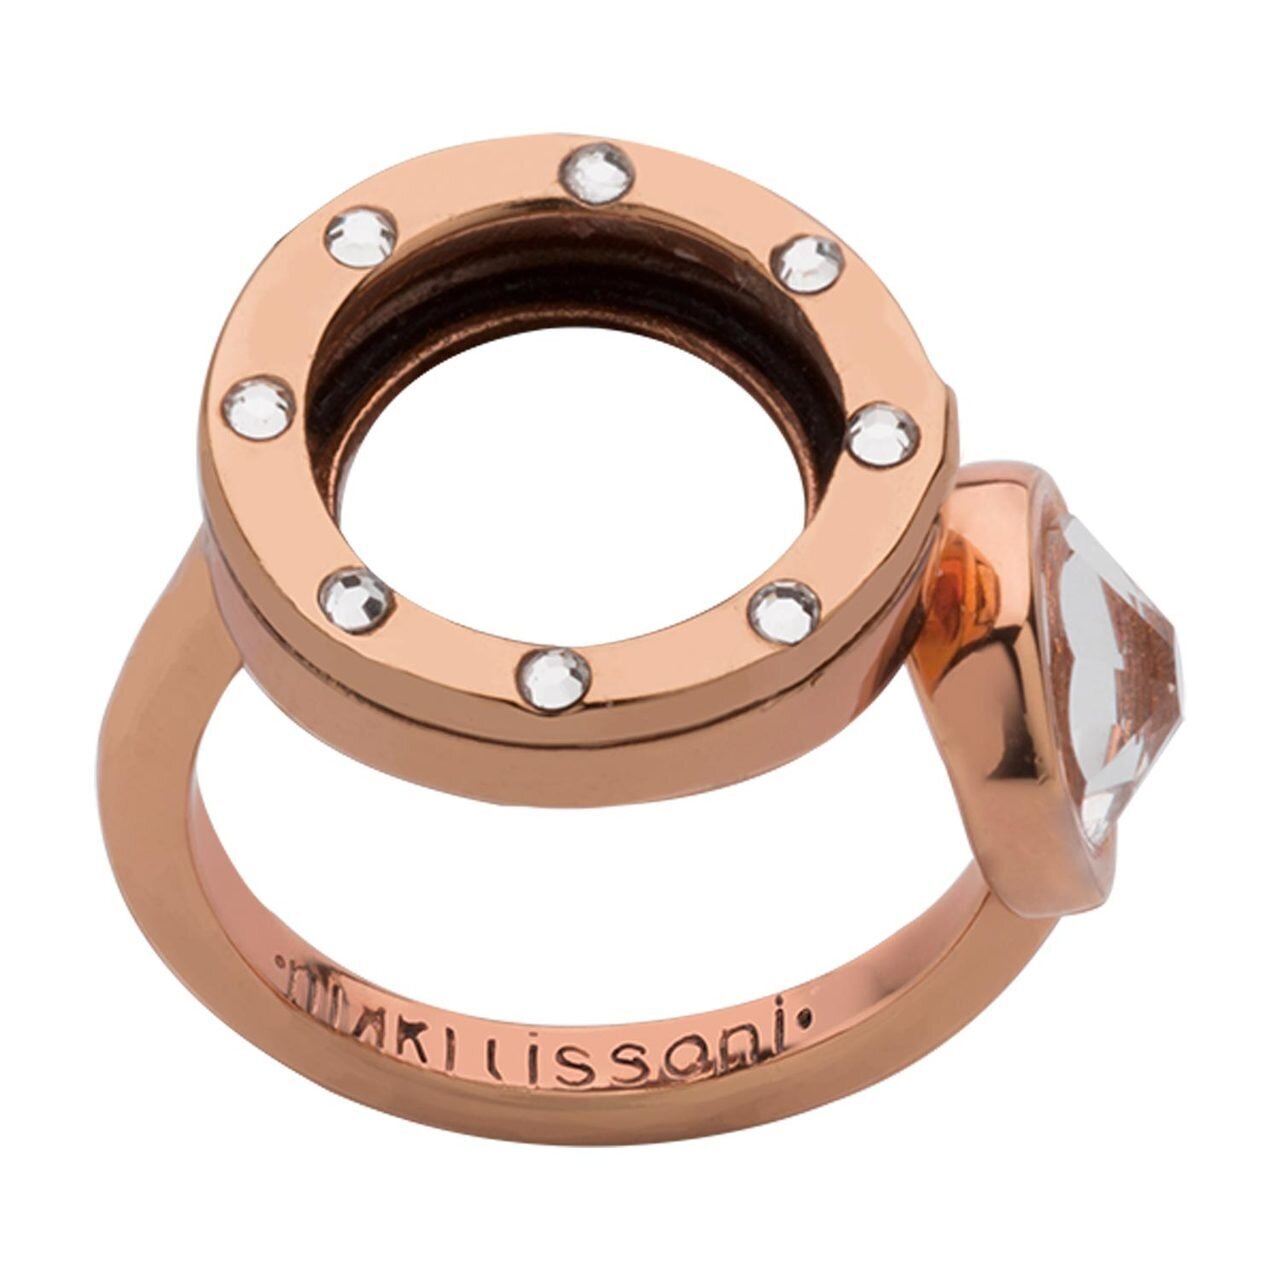 Nikki Lissoni Interchangeable Open Ring with Swarovski Stones Rose Gold-plated Size 9 R1006RG9